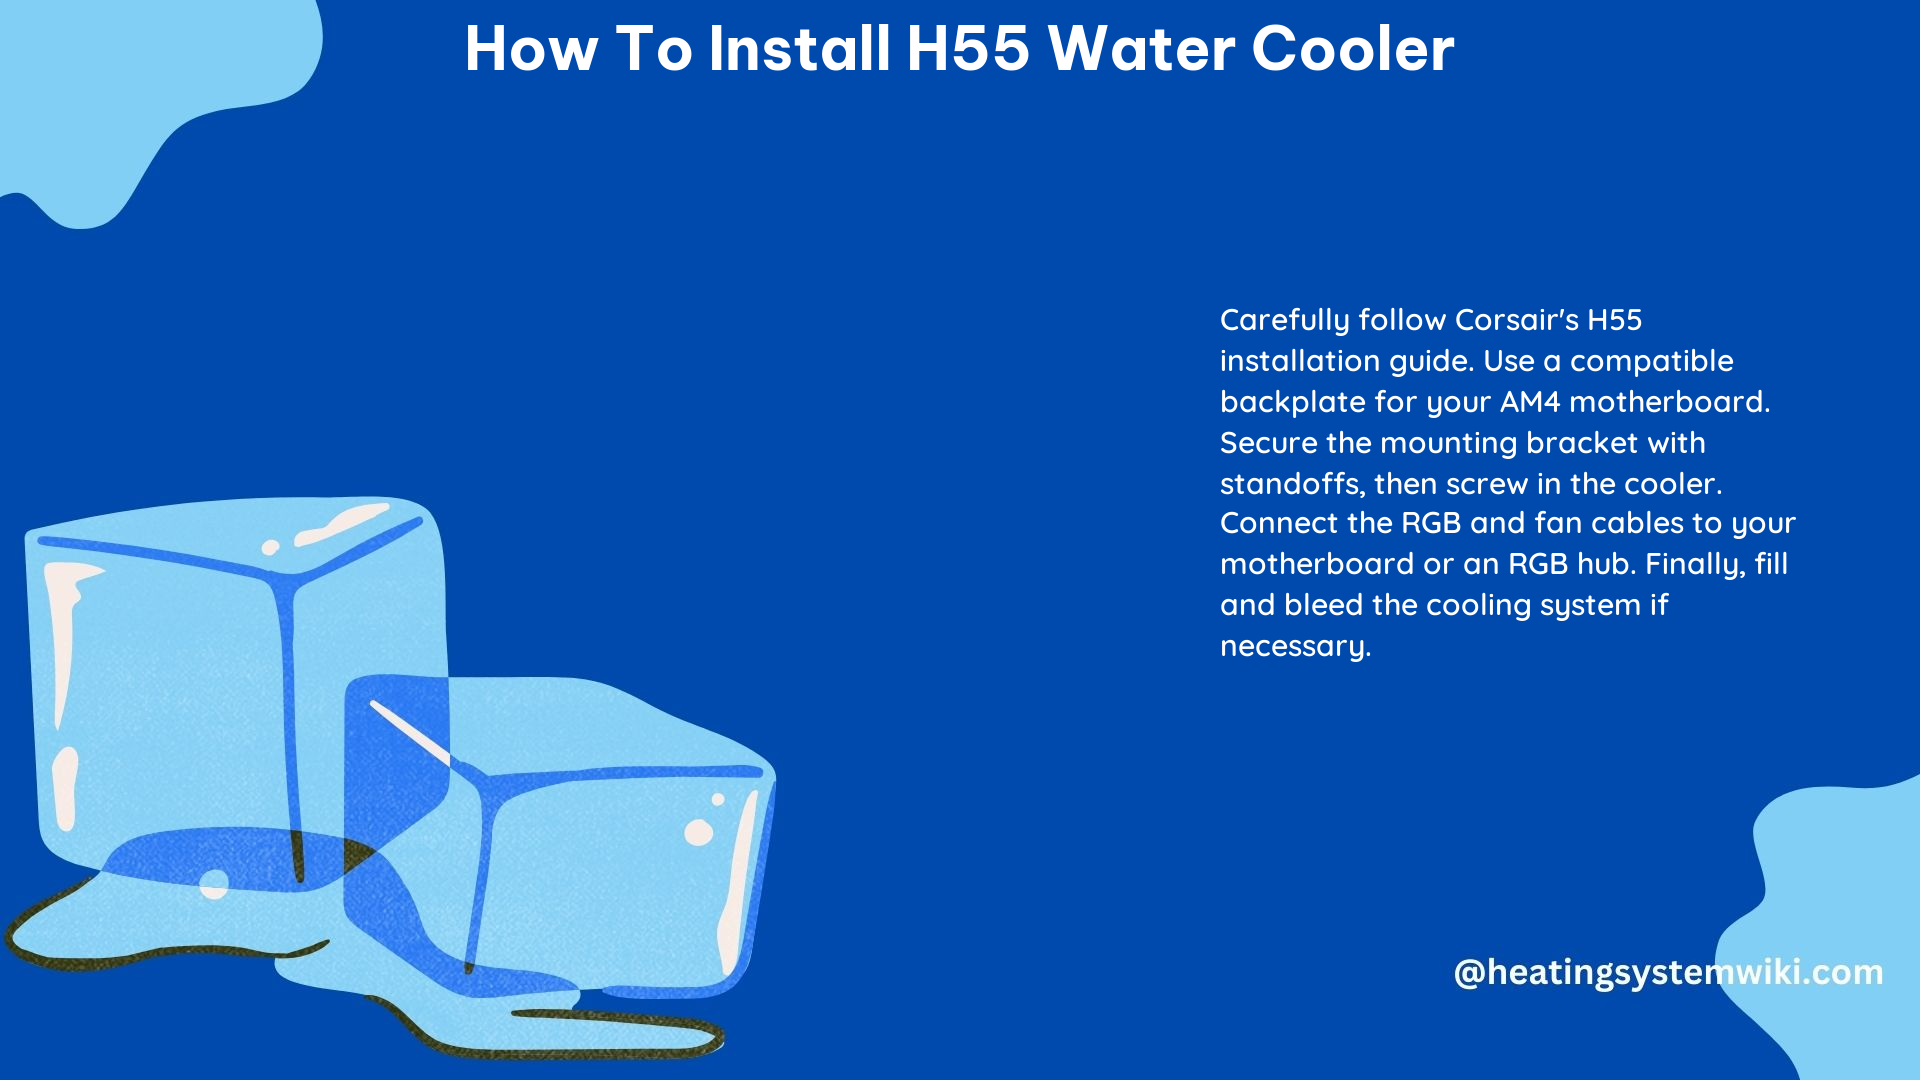 How to Install H55 Water Cooler